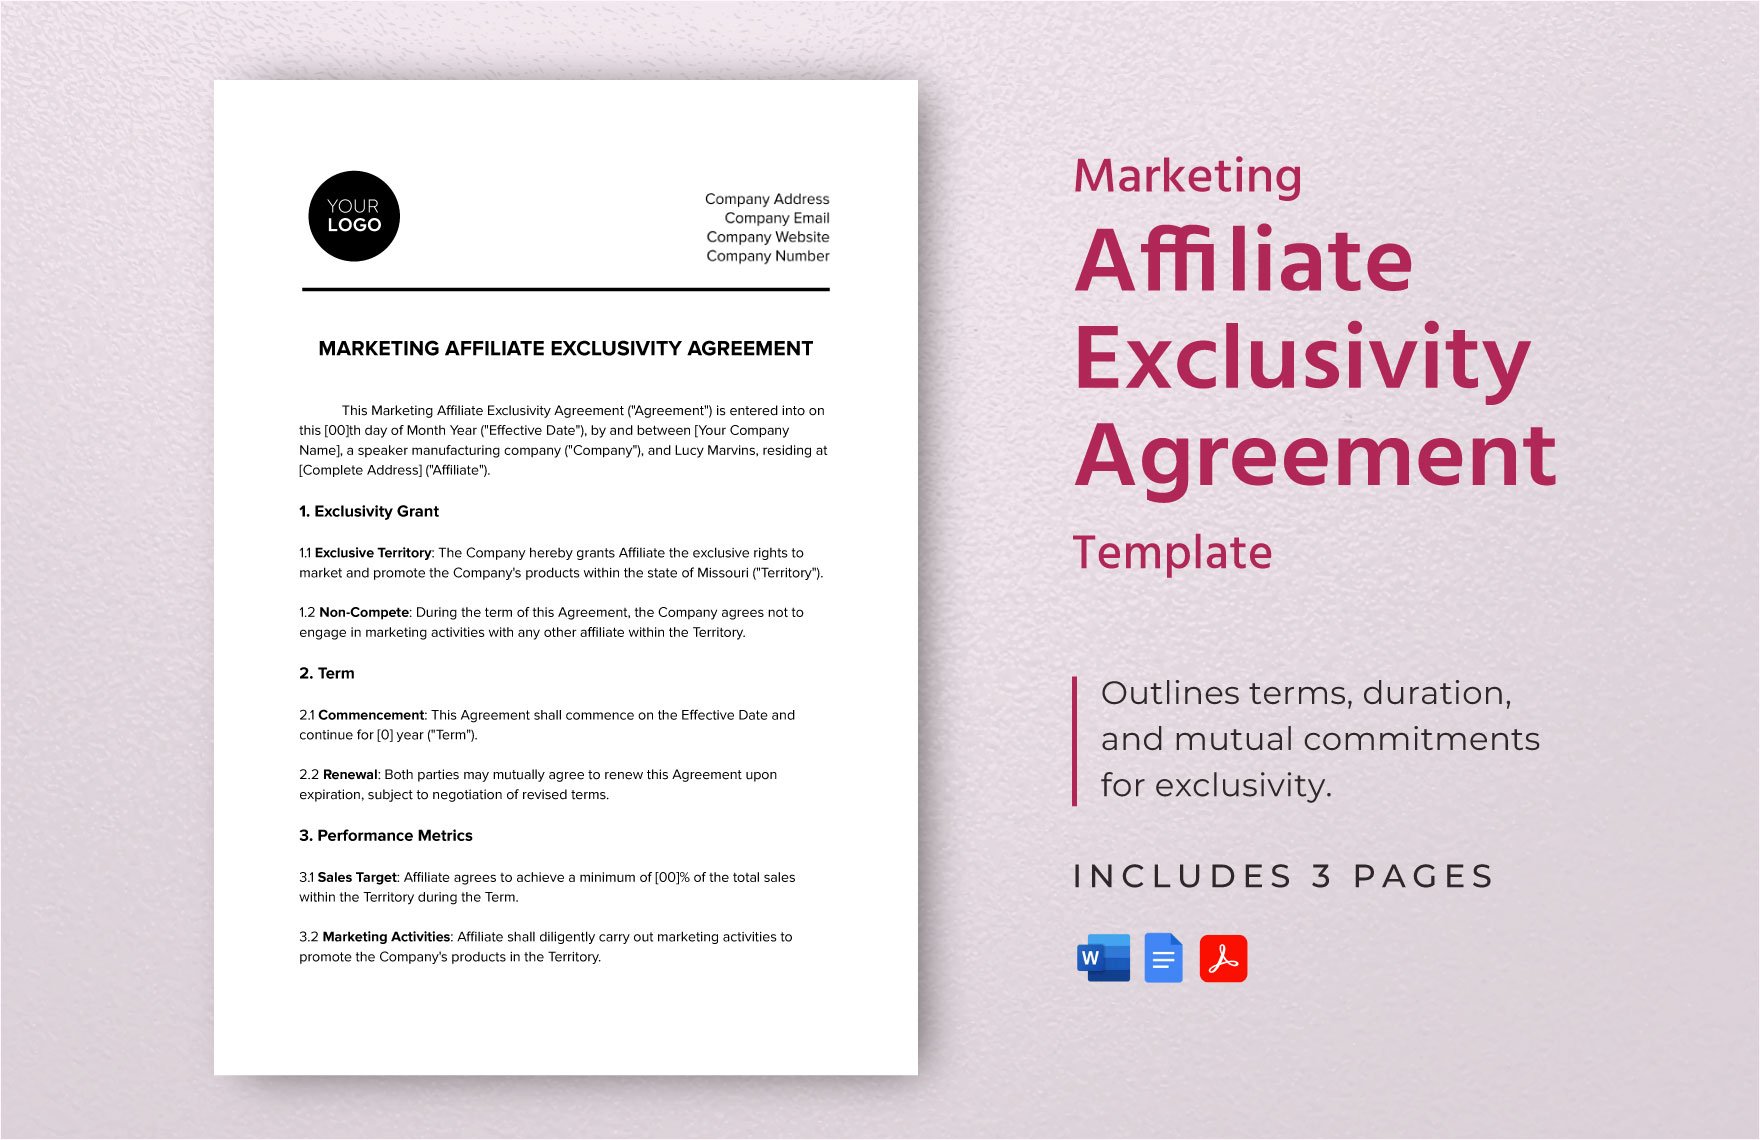 Marketing Affiliate Exclusivity Agreement Template